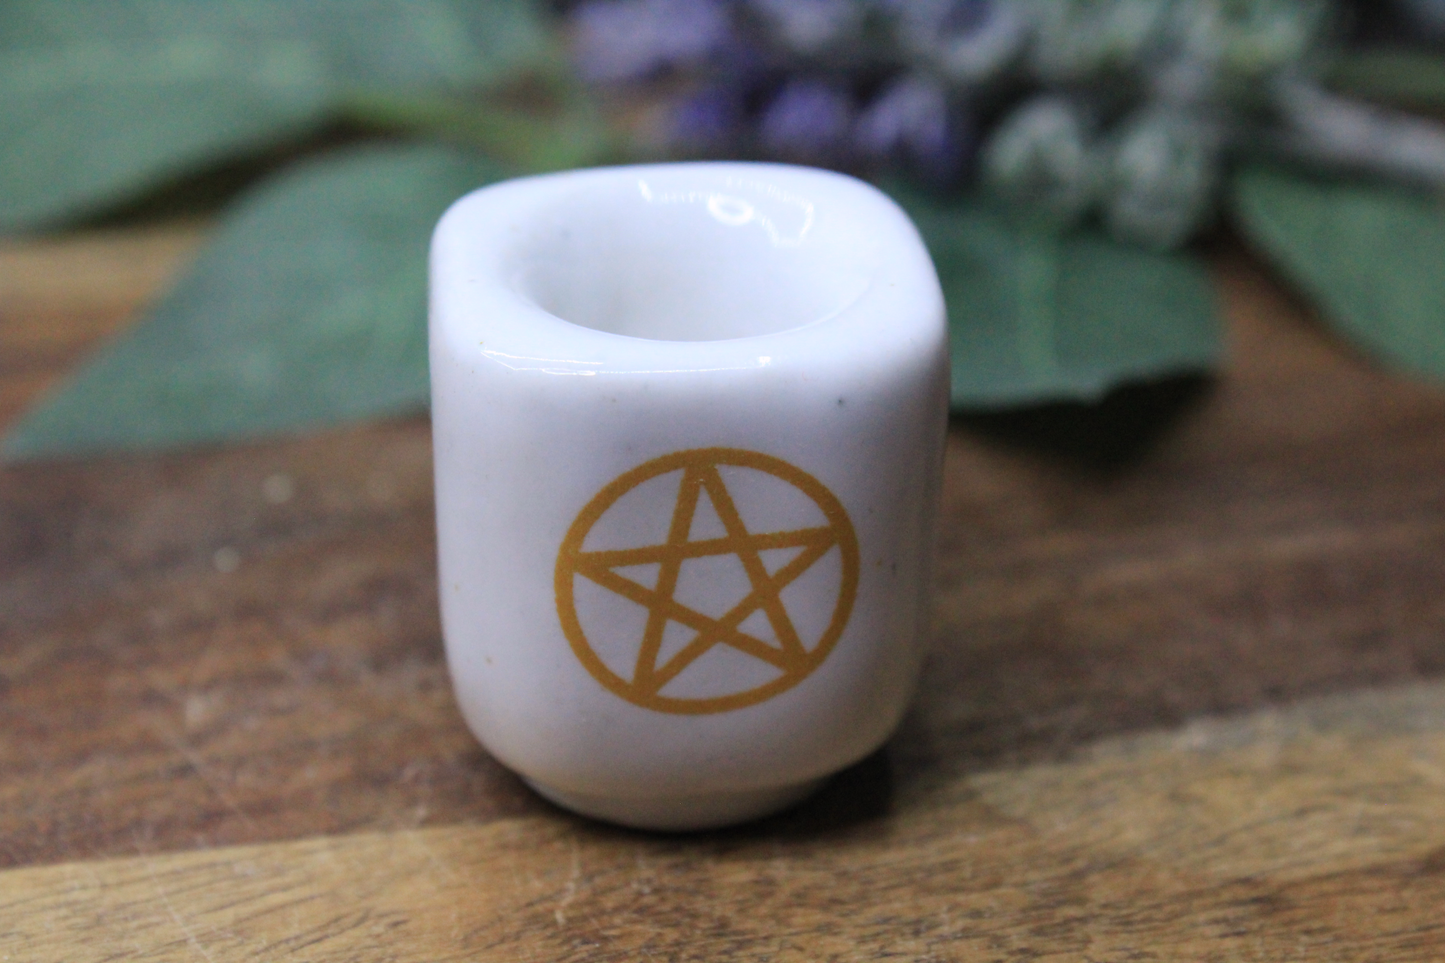 Ceramic Chime Candle Holder - White with Pentacle